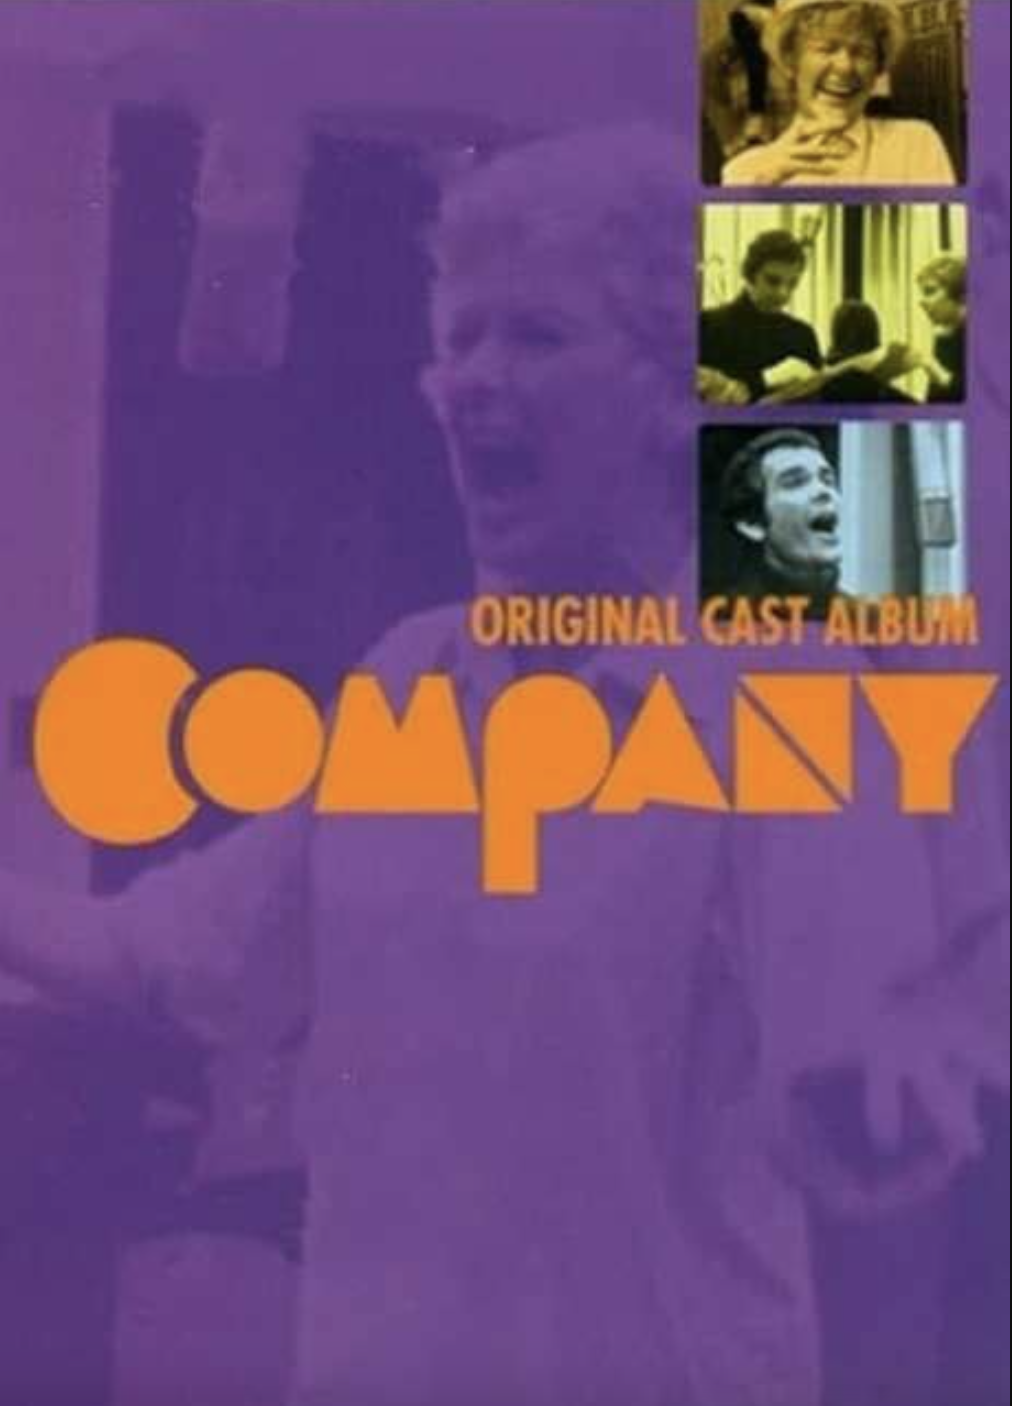 the cover of the original cast album company shows a white woman yelling or maybe singing under a purple filter